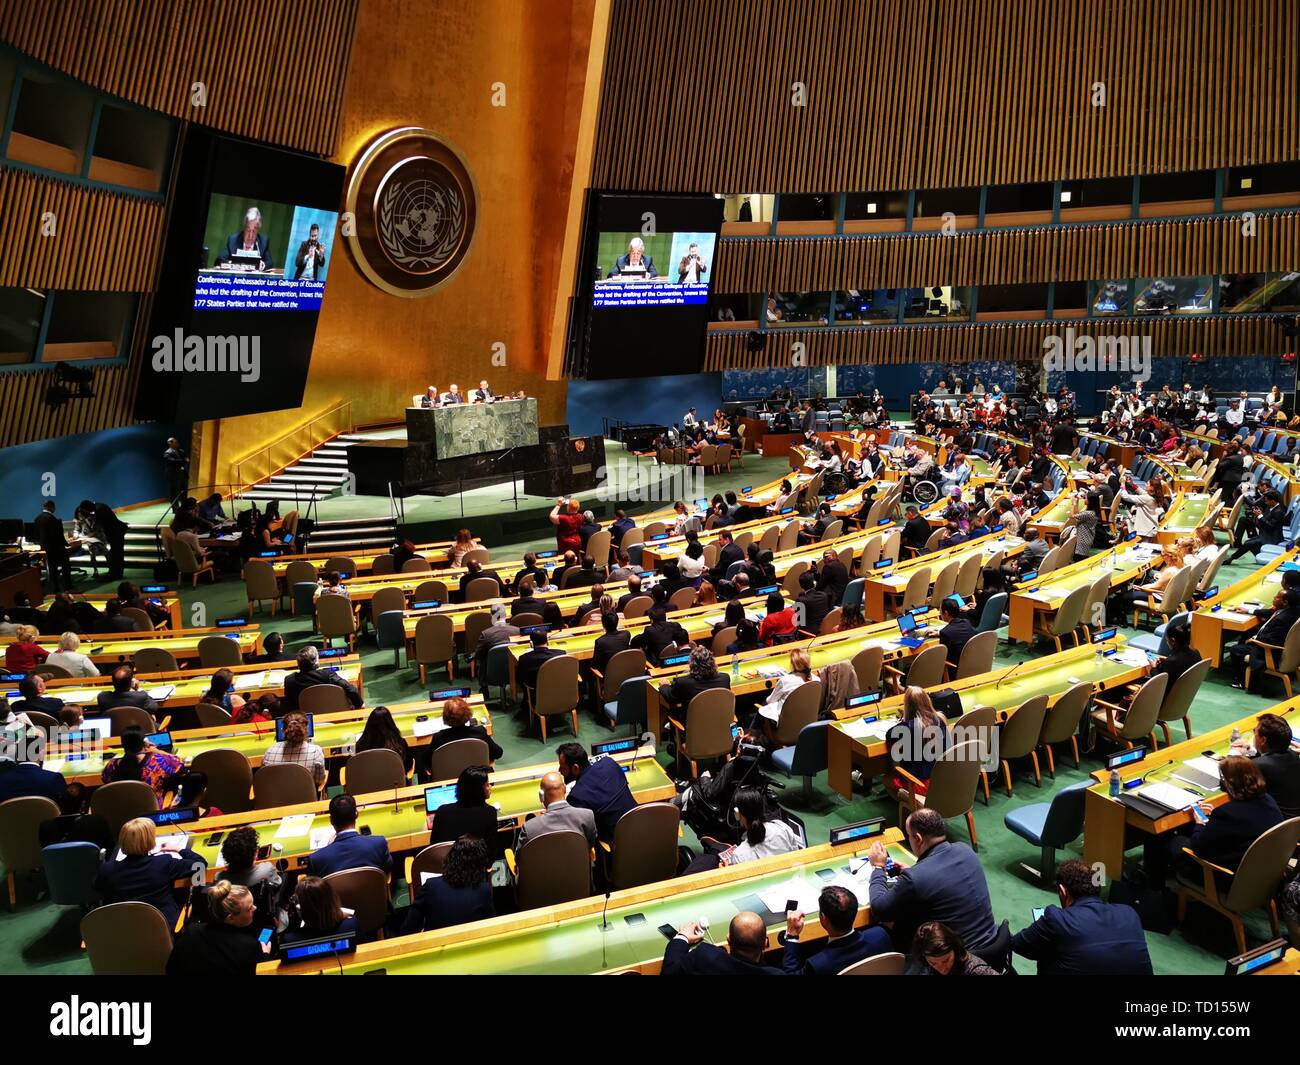 United Nations. 11th June, 2019. Photo taken on June 11, 2019 shows the 12th Session of the Conference of States Parties to the Convention on the Rights of Persons with Disabilities at the UN headquarters in New York. The acting chair of Committee on the Rights of Persons with Disabilities said on Tuesday that due to cash flow difficulties United Nations is facing, sessions of six of the ten UN human rights treaty bodies will be cancelled. Credit: Li Muzi/Xinhua/Alamy Live News Stock Photo